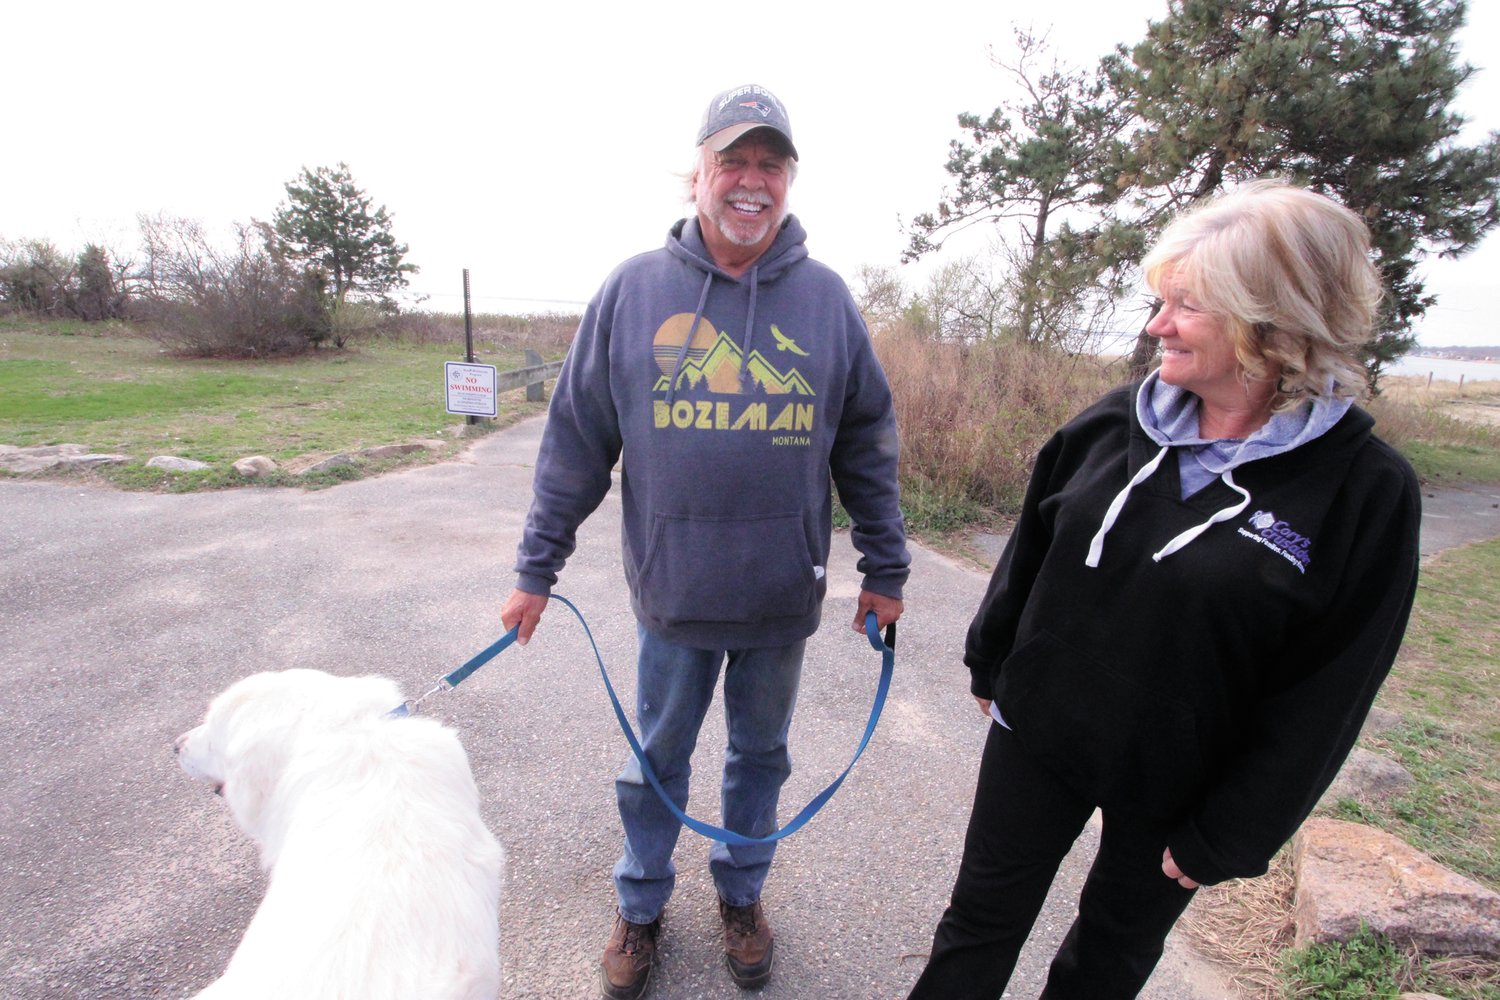 THEY’VE SEEN THE CHANGES:  Cindey and Steve Uralowich who routinely walk their dog Montana at the park have noticed the loss of beach sand and the number of dead trees.